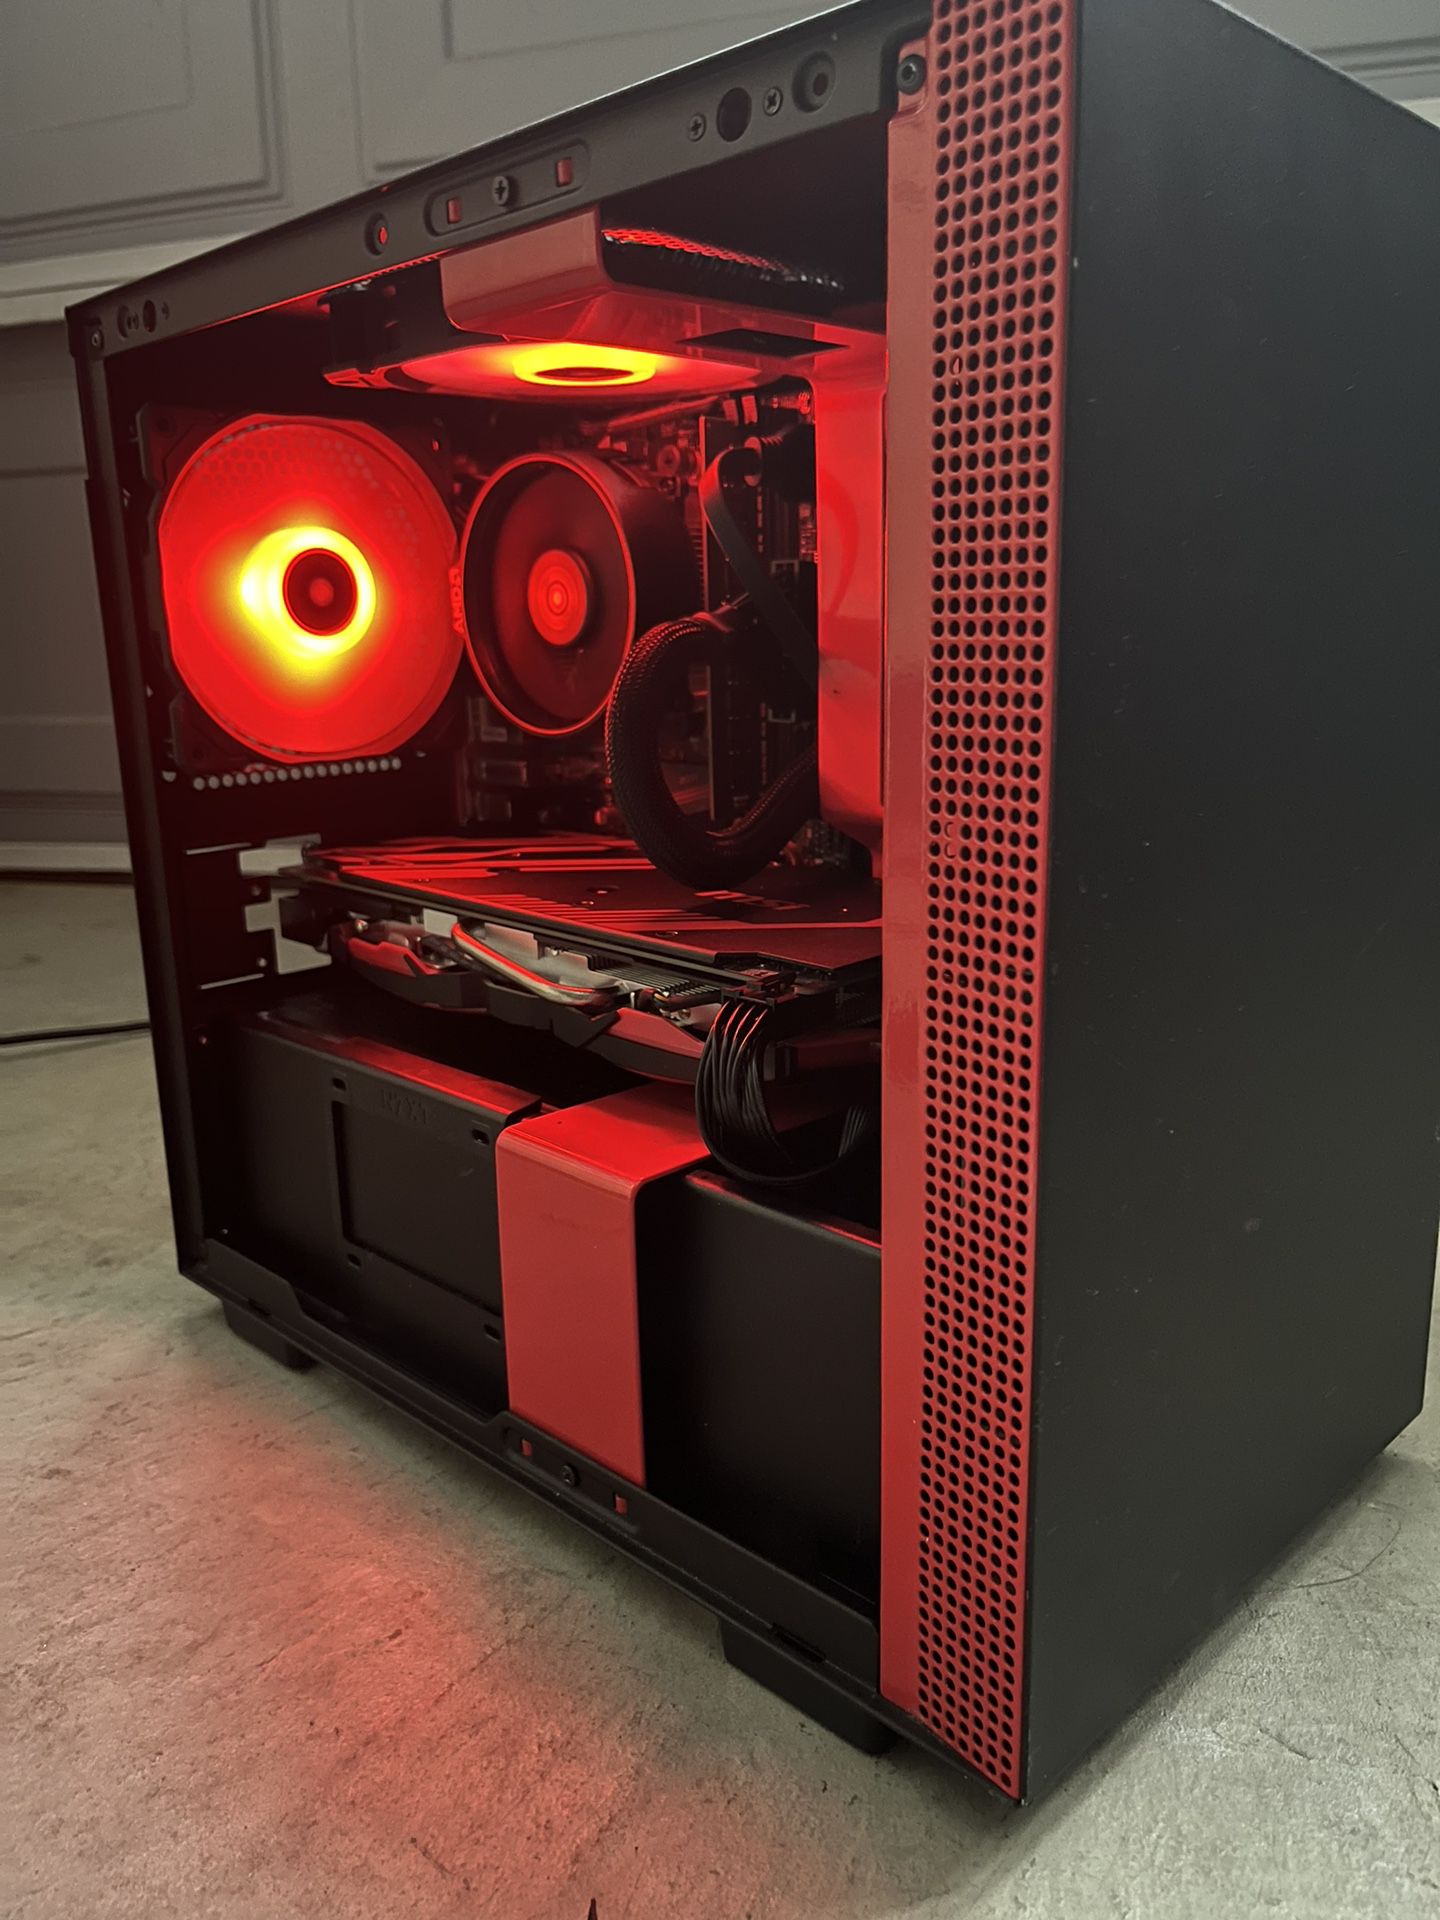 FOR PARTS: (Entry-level) Red Mini-ITX Desktop Pc Gaming Computer - Ryzen 2600x ; Rx 580 ; 16gb ram